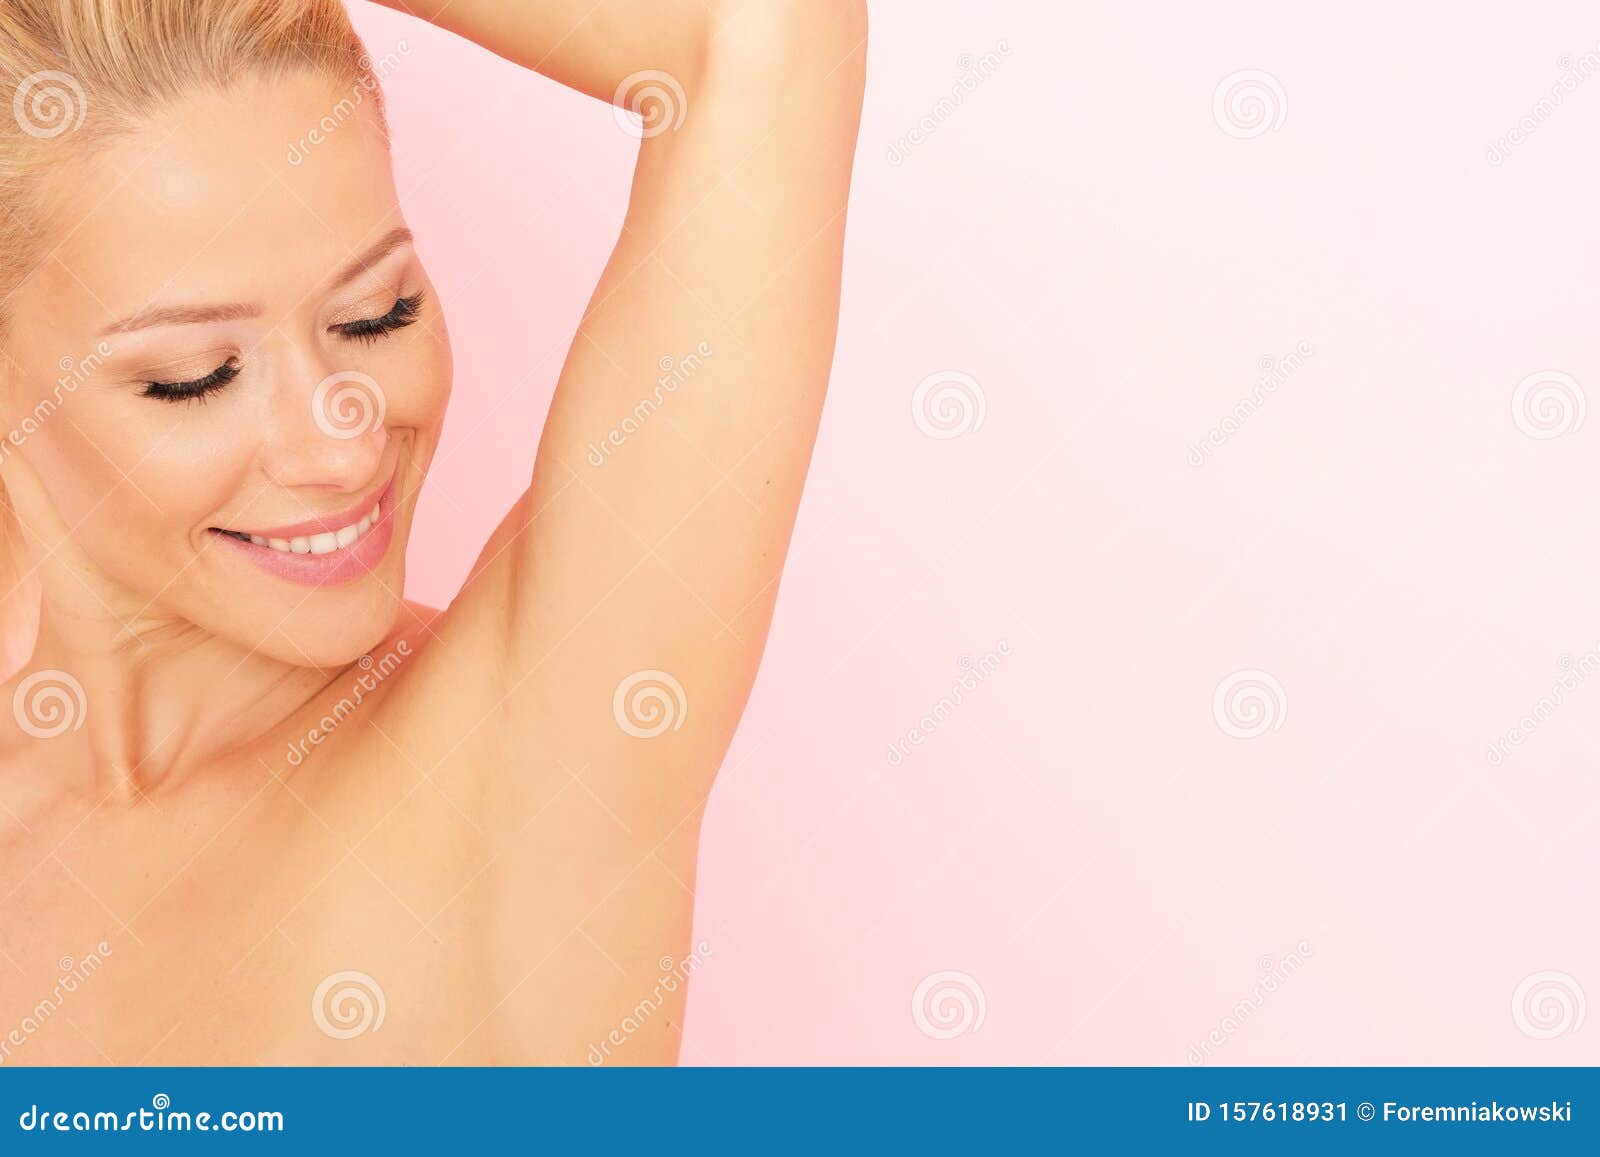 close up of smooth armpit. smiling woman touching her axilla.